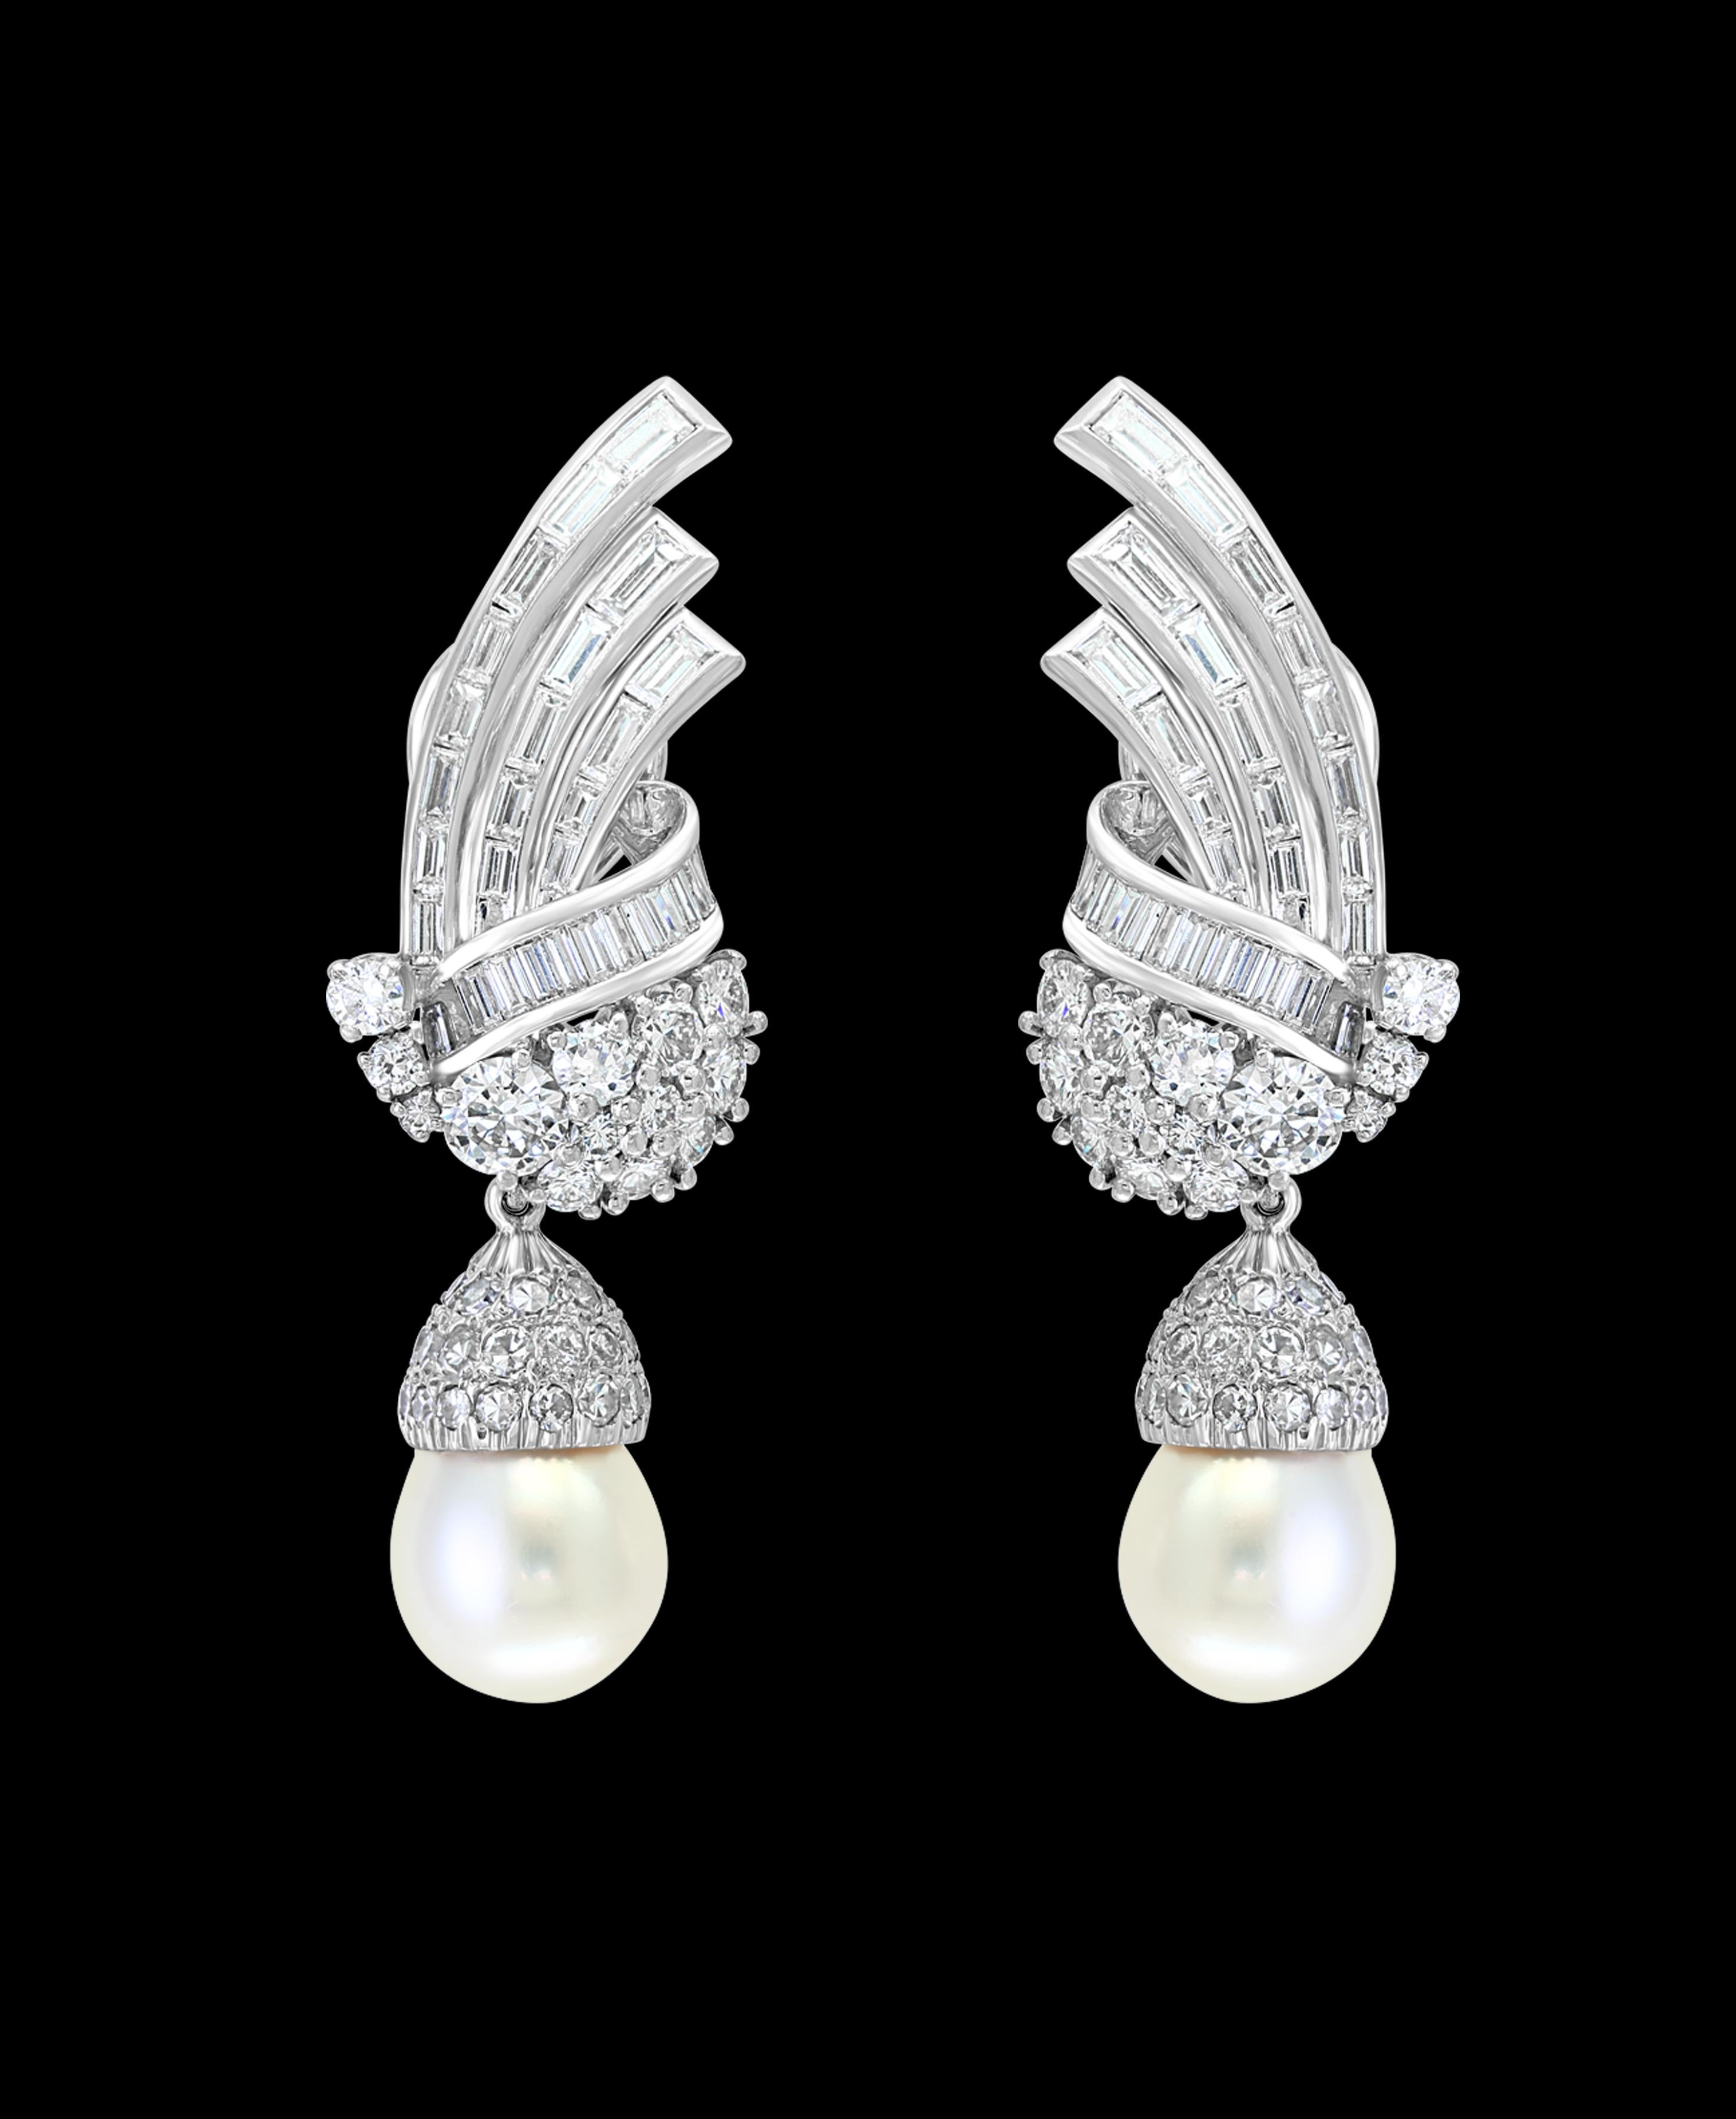 Antique Diamond Pearl Suite in 18 Karat White Gold, Bridal, Estate In Excellent Condition For Sale In New York, NY